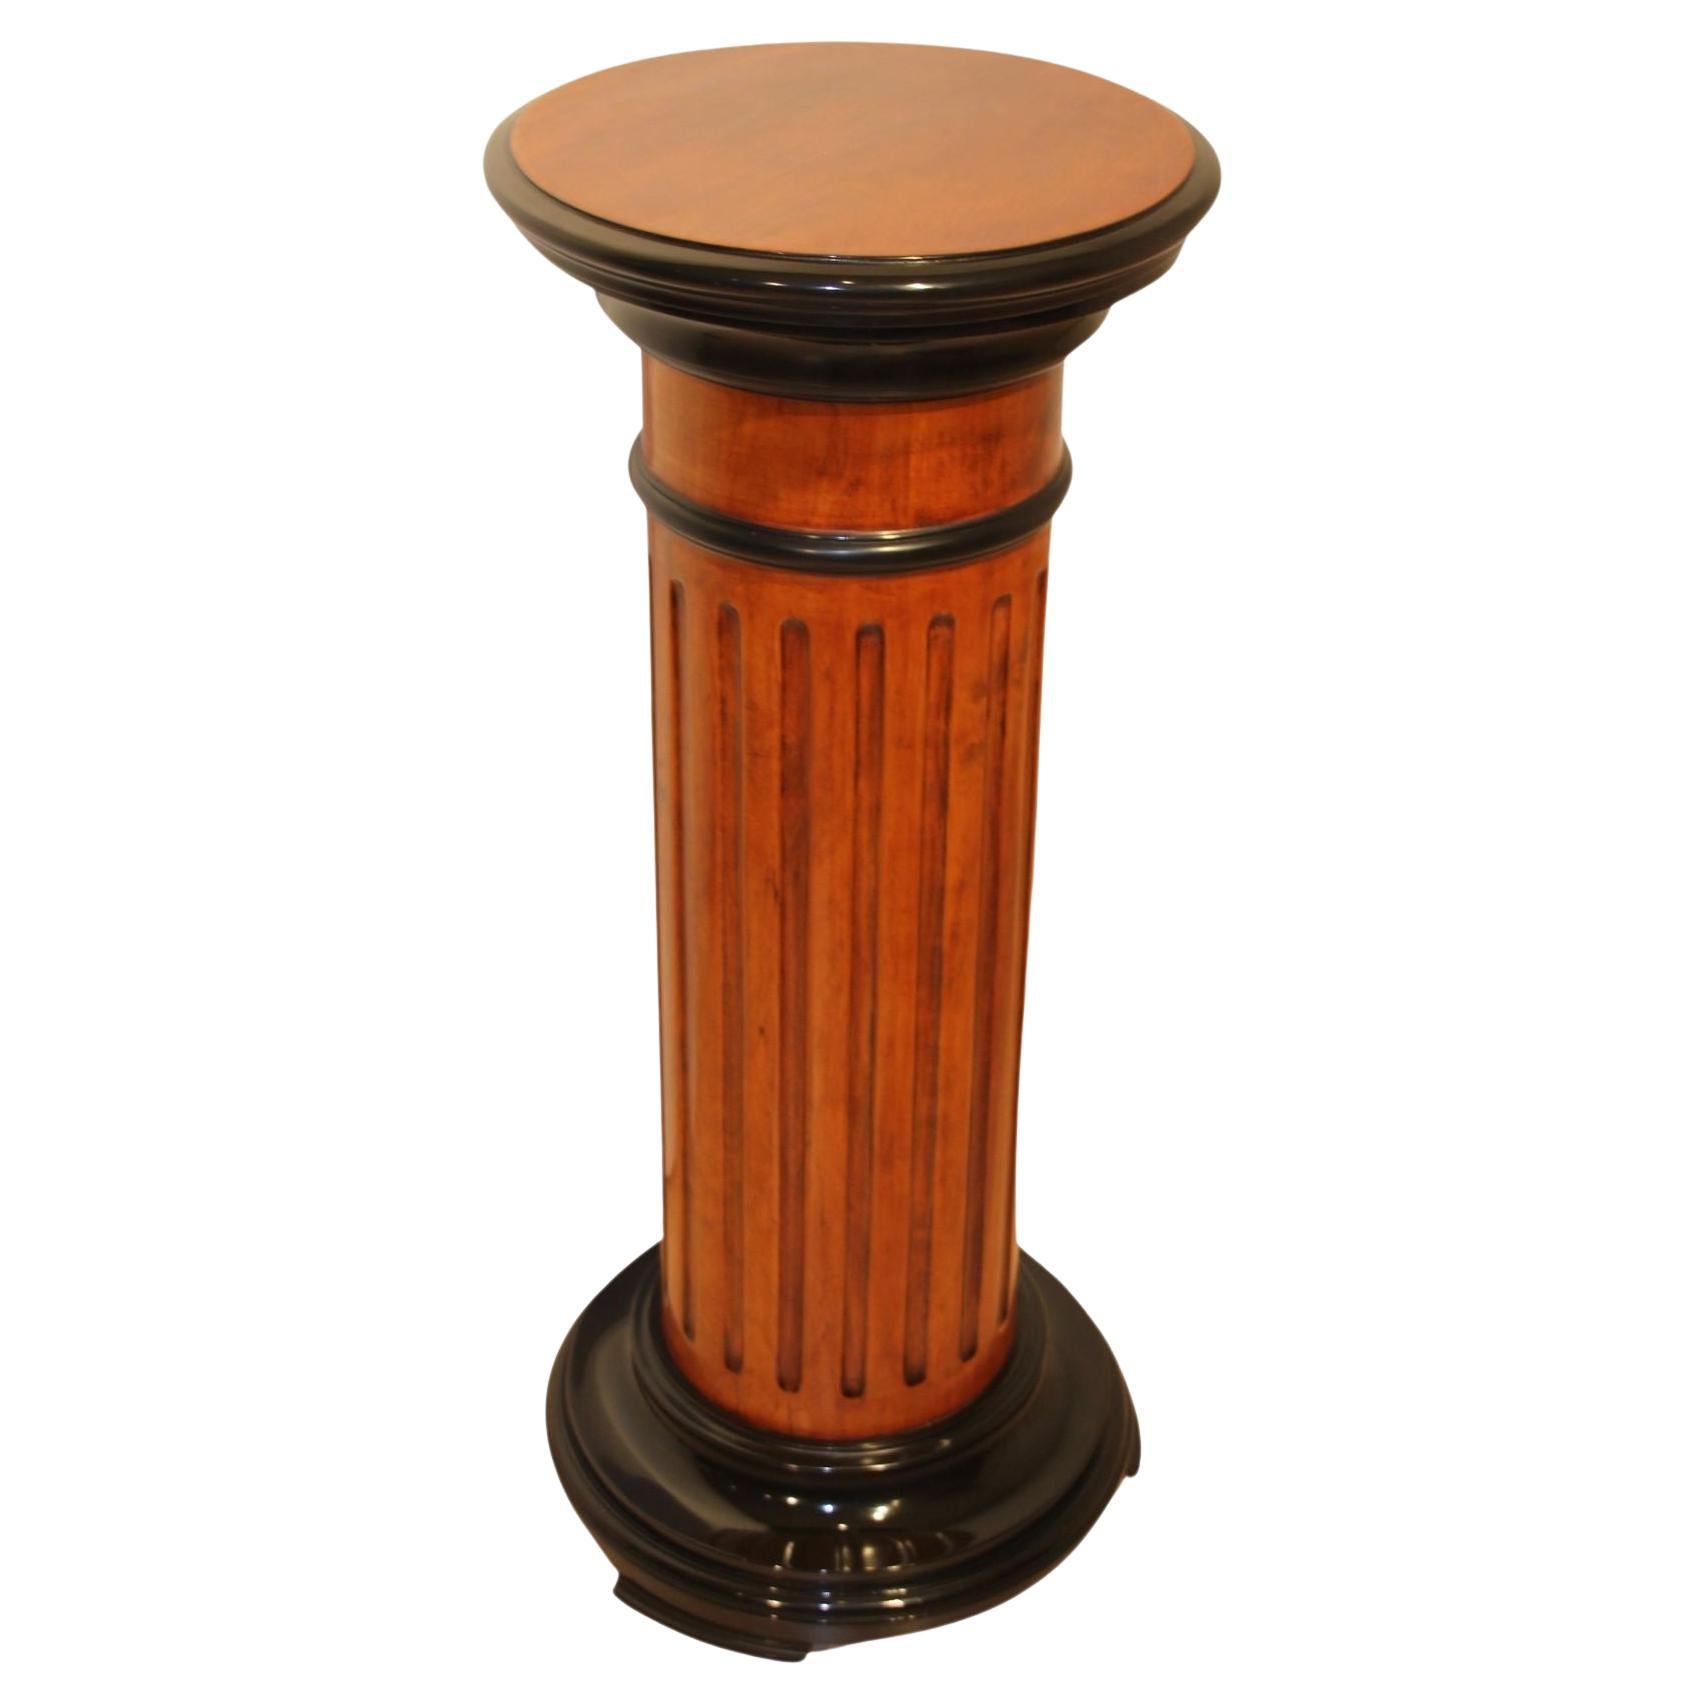 Neoclassical Rotating Pedestal, Beech Wood, French Polished, Germany, Circa 1920 For Sale